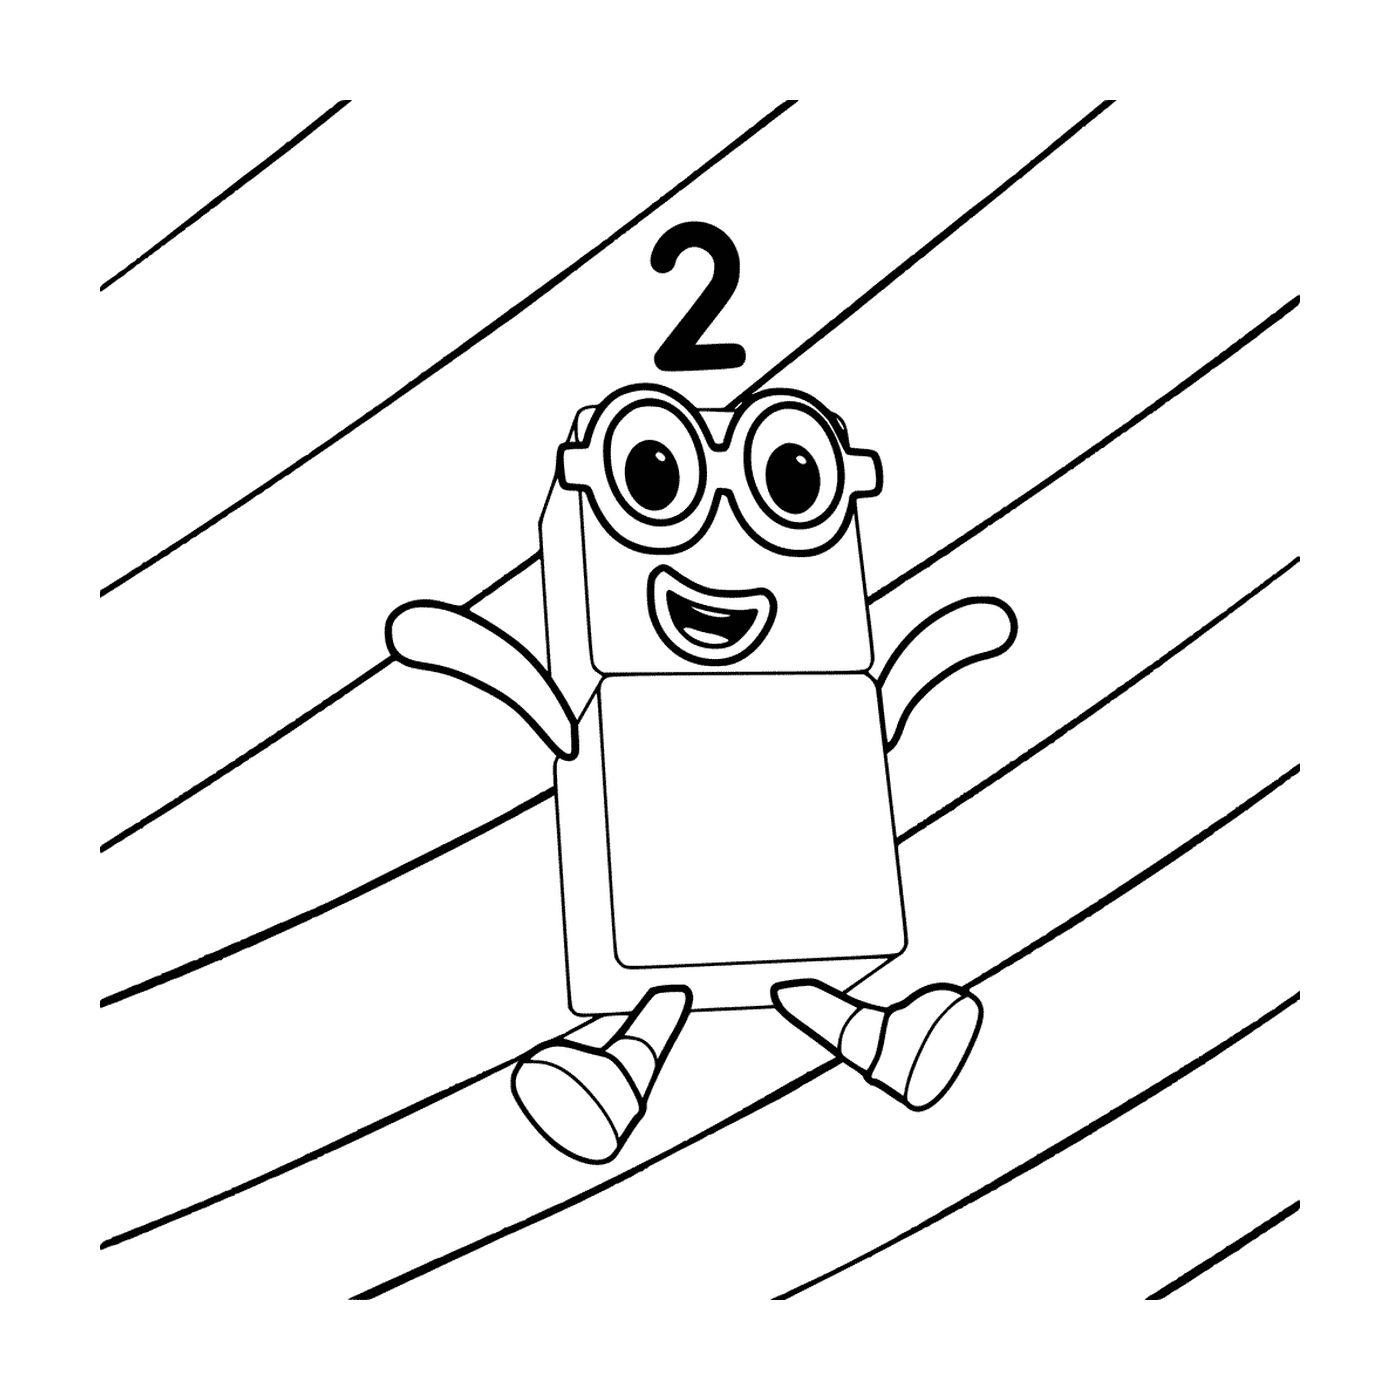  Numberblocks number 2, funny character 